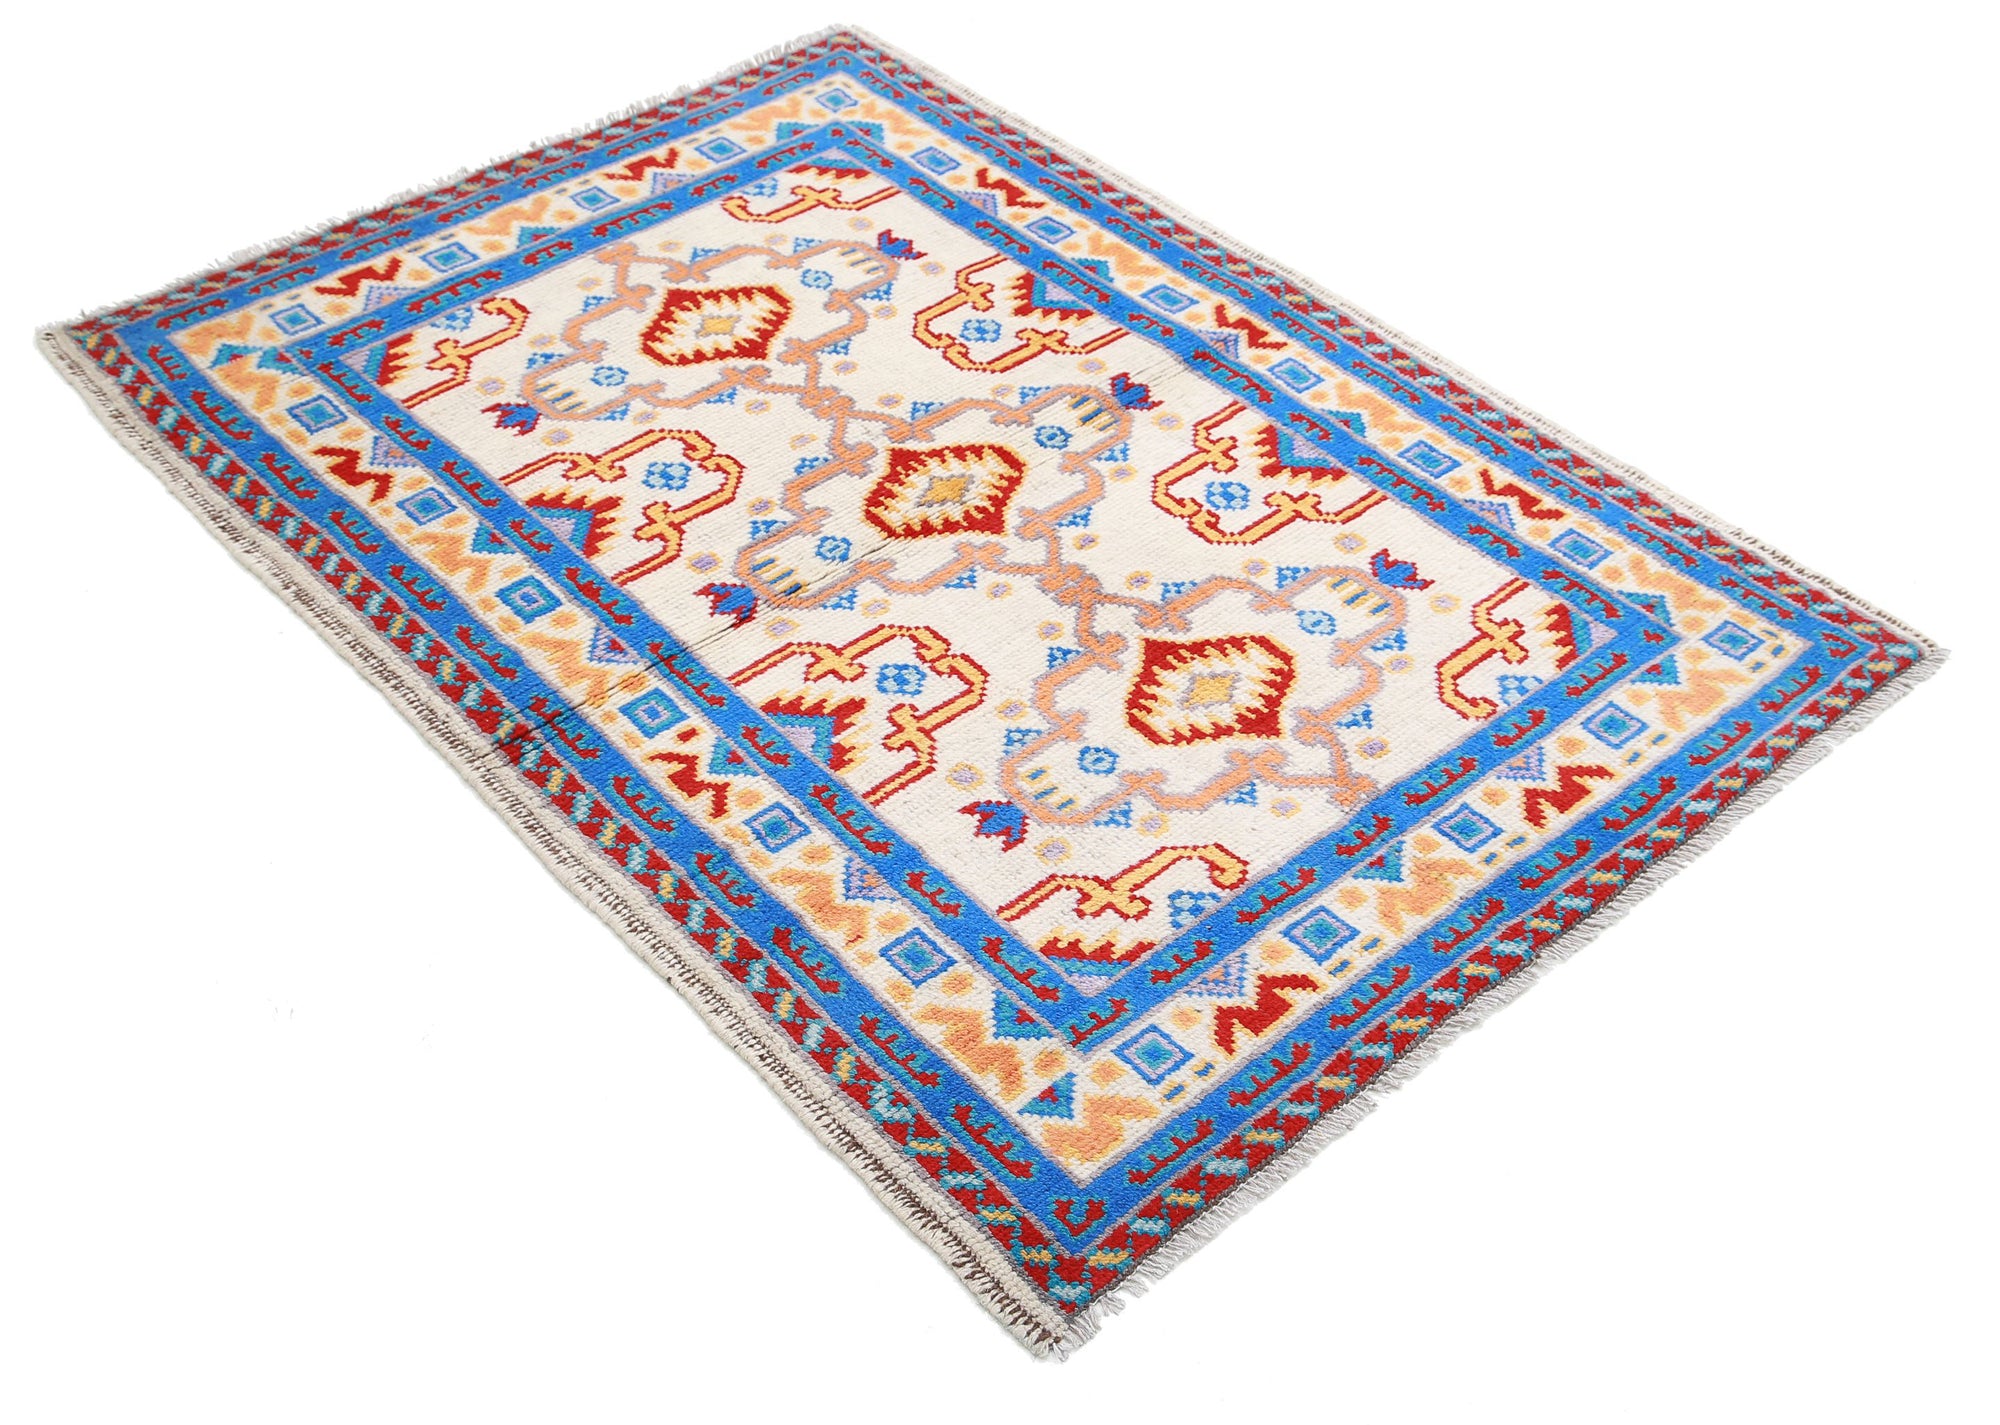 Revival-hand-knotted-qarghani-wool-rug-5014206-1.jpg